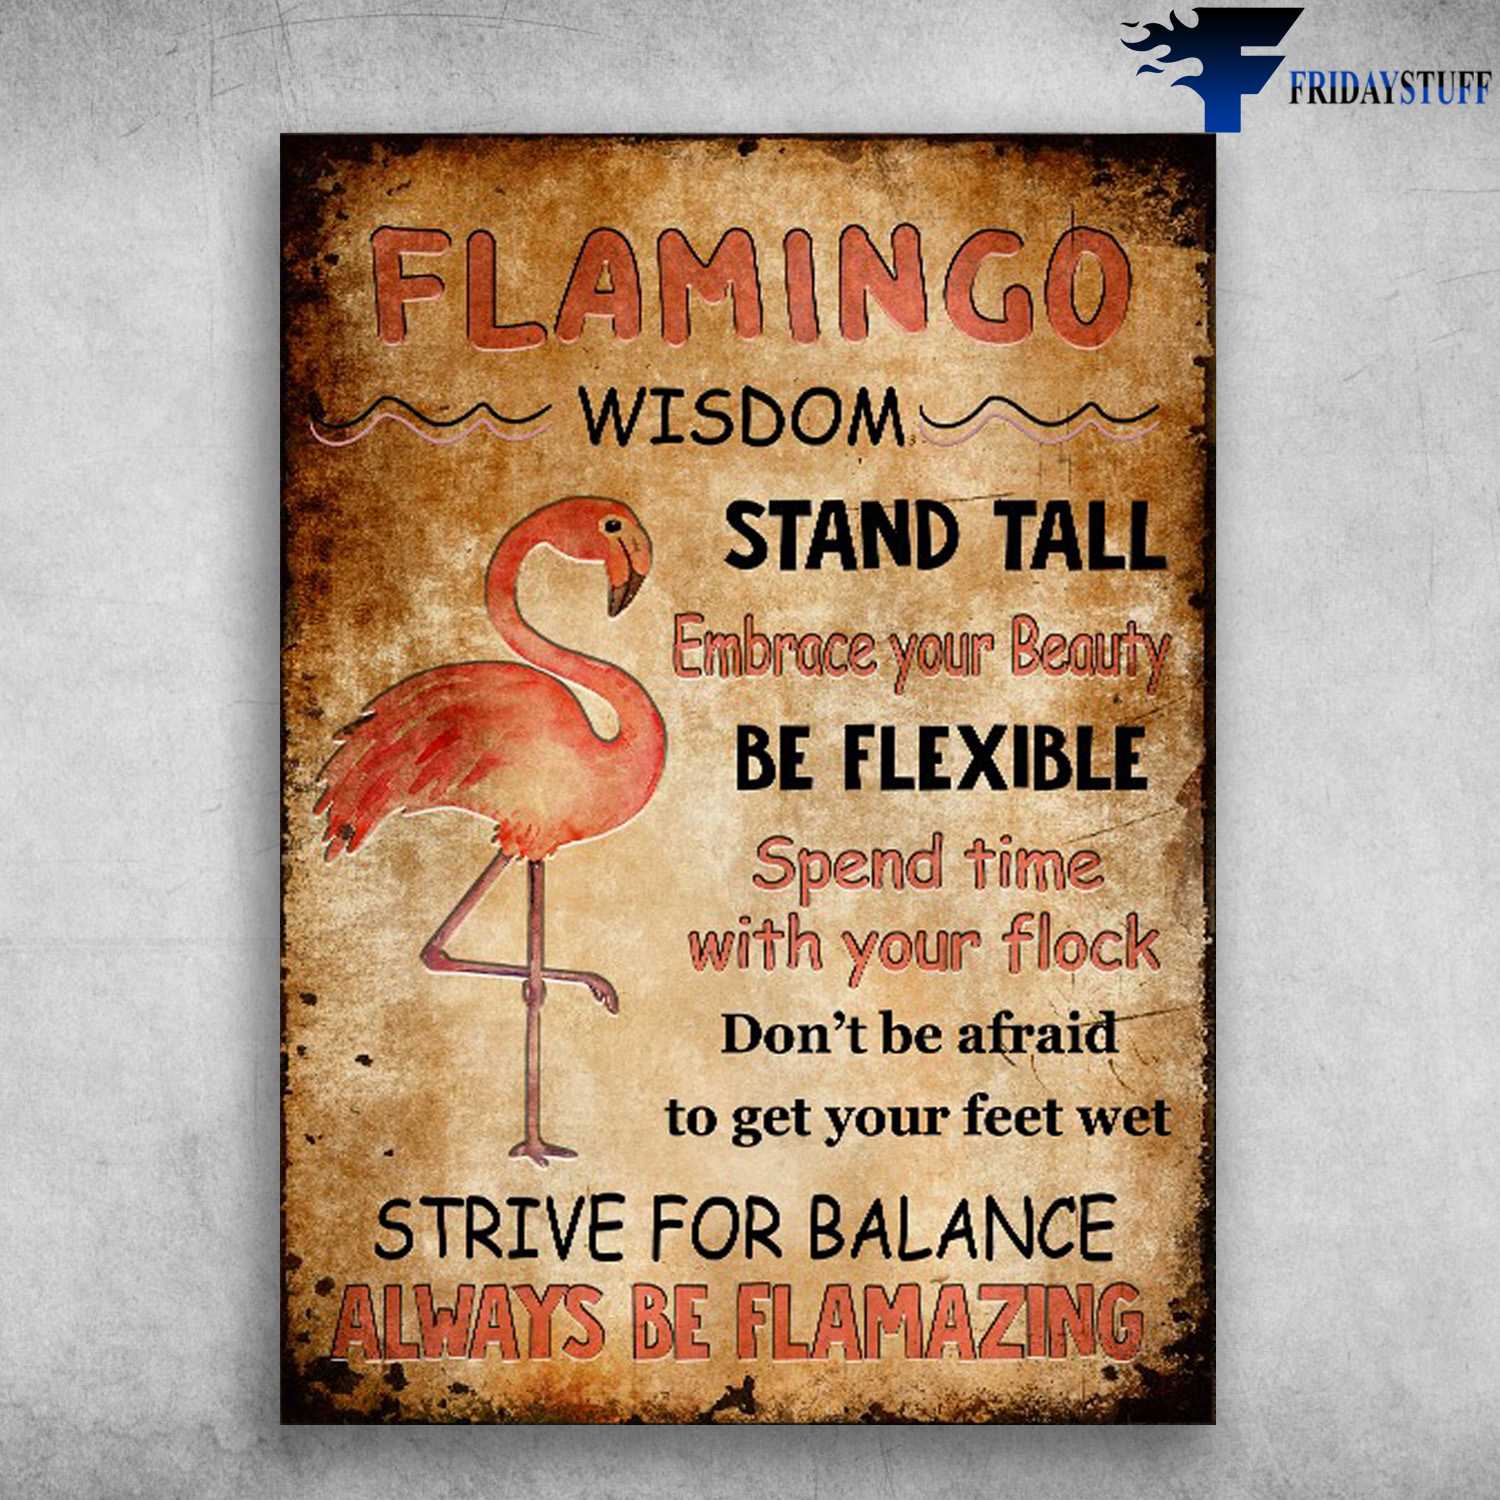 Flamingo Wisdom, Stand Tall, Embrace Your Beauty, Be Flexible, Spend Time With Your Flock, Don't Be Afraid To Get Your Feet Wet, Strive For Balance, Always Be Flamazing